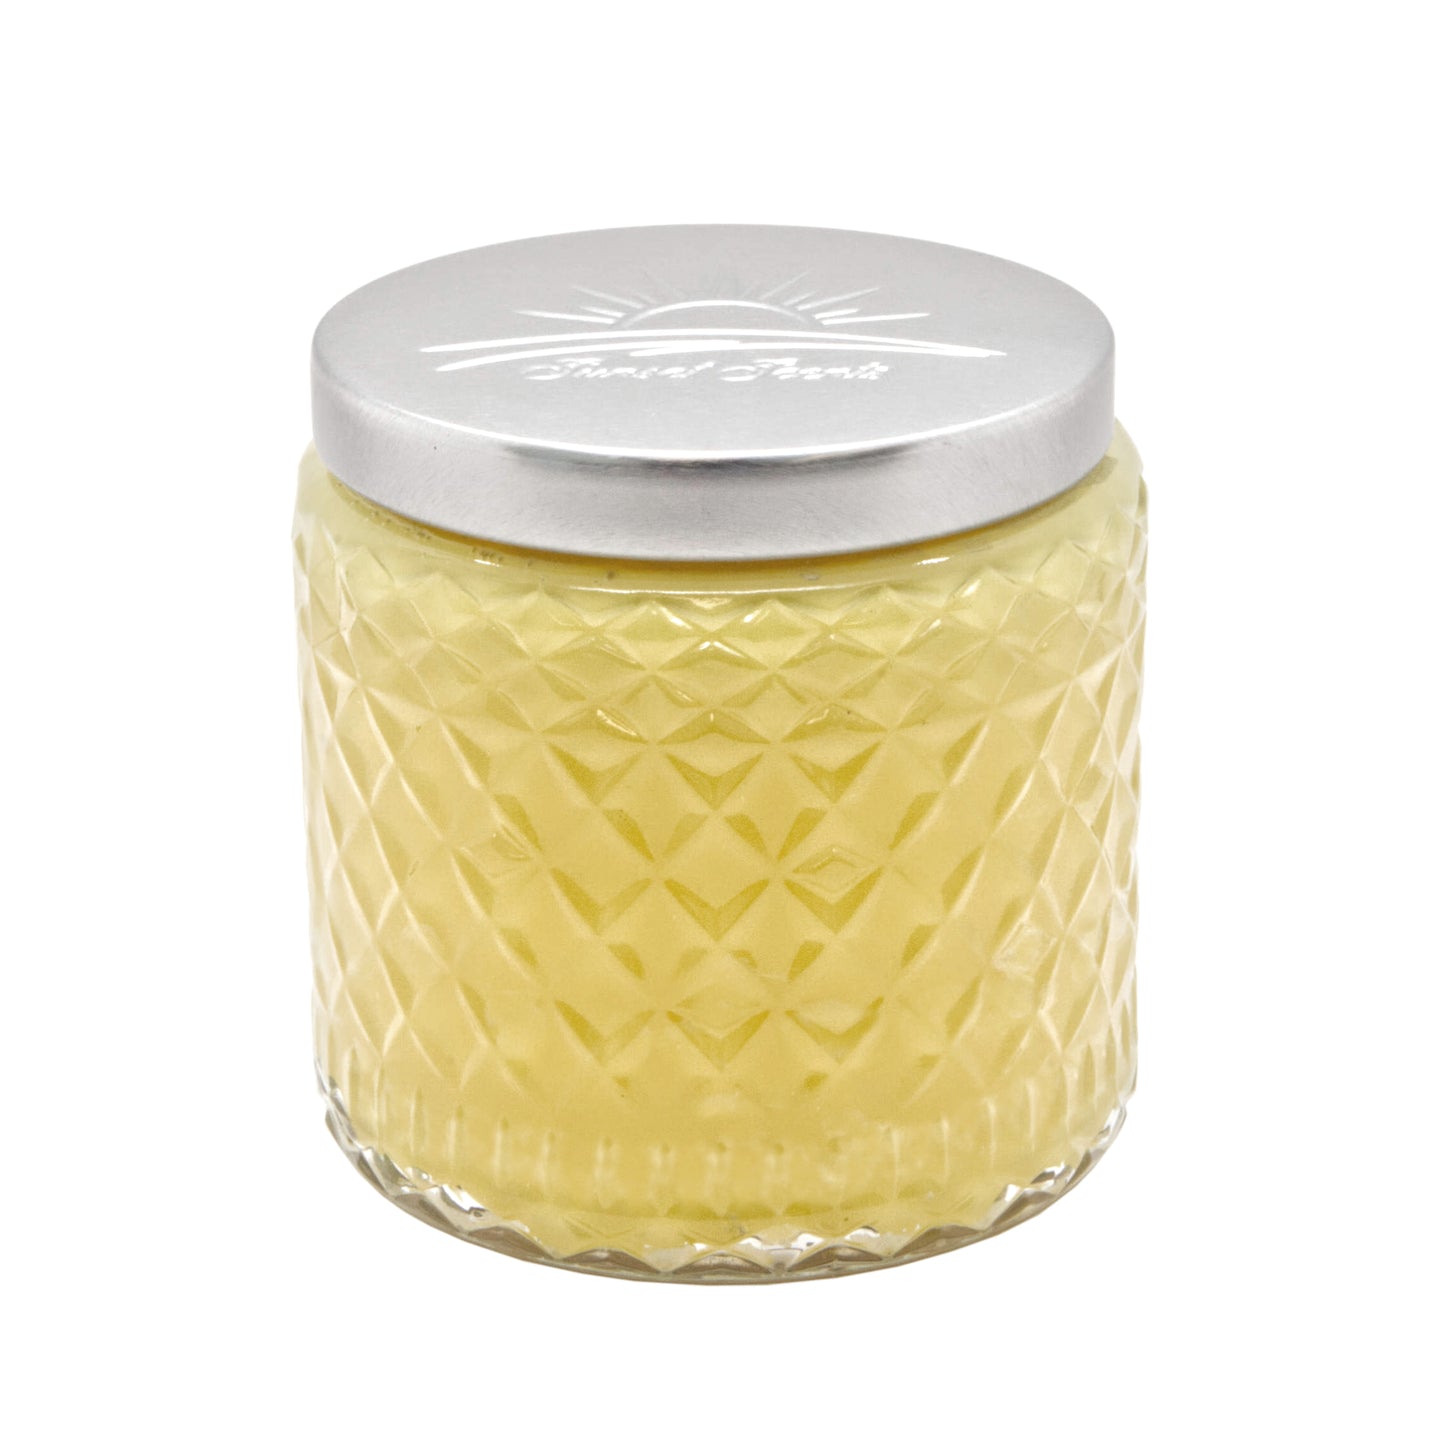 Banana Nut Bread Scented Candle